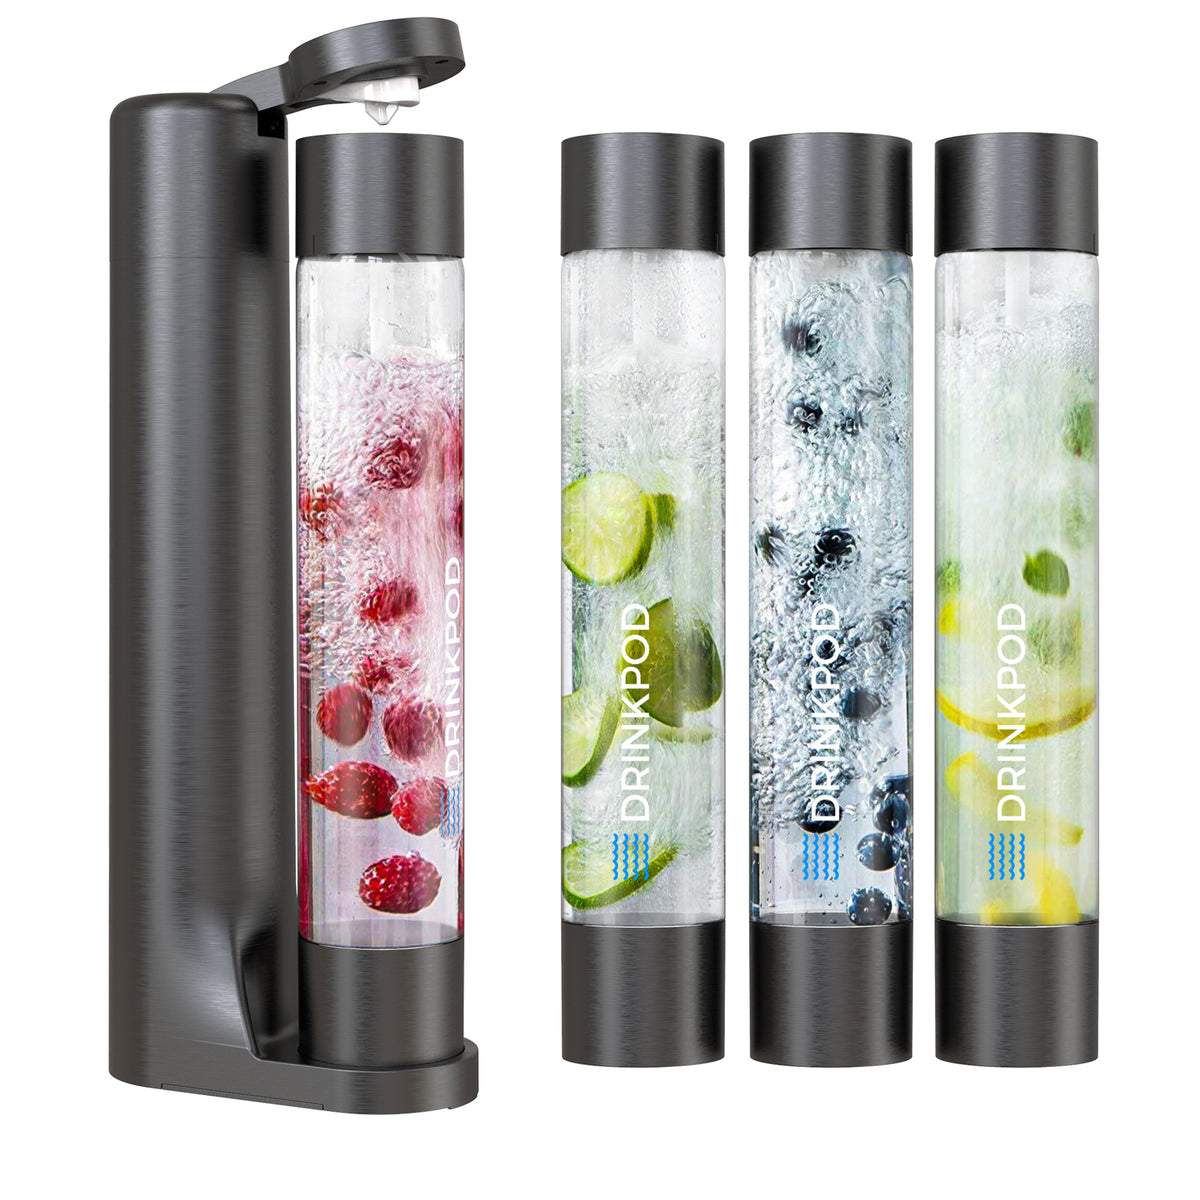 FIZZPod Soda Machine - Make Homemade Sparkling Water, Juice, Tea and Cocktail Drinks with Fruits &amp; Candy